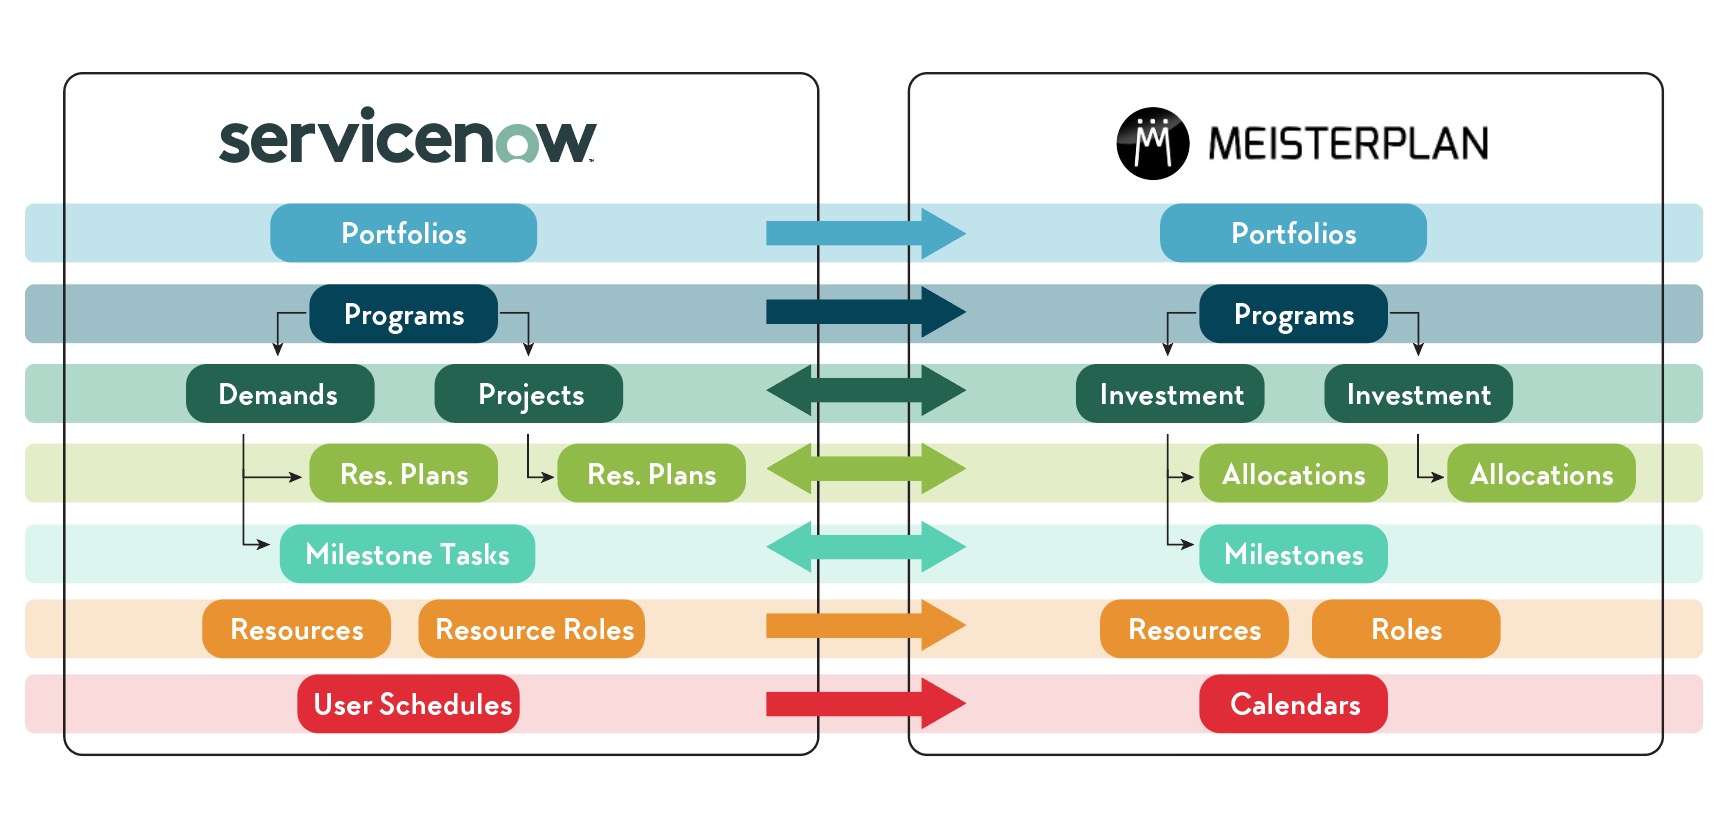 Meisterplan and ServiceNow